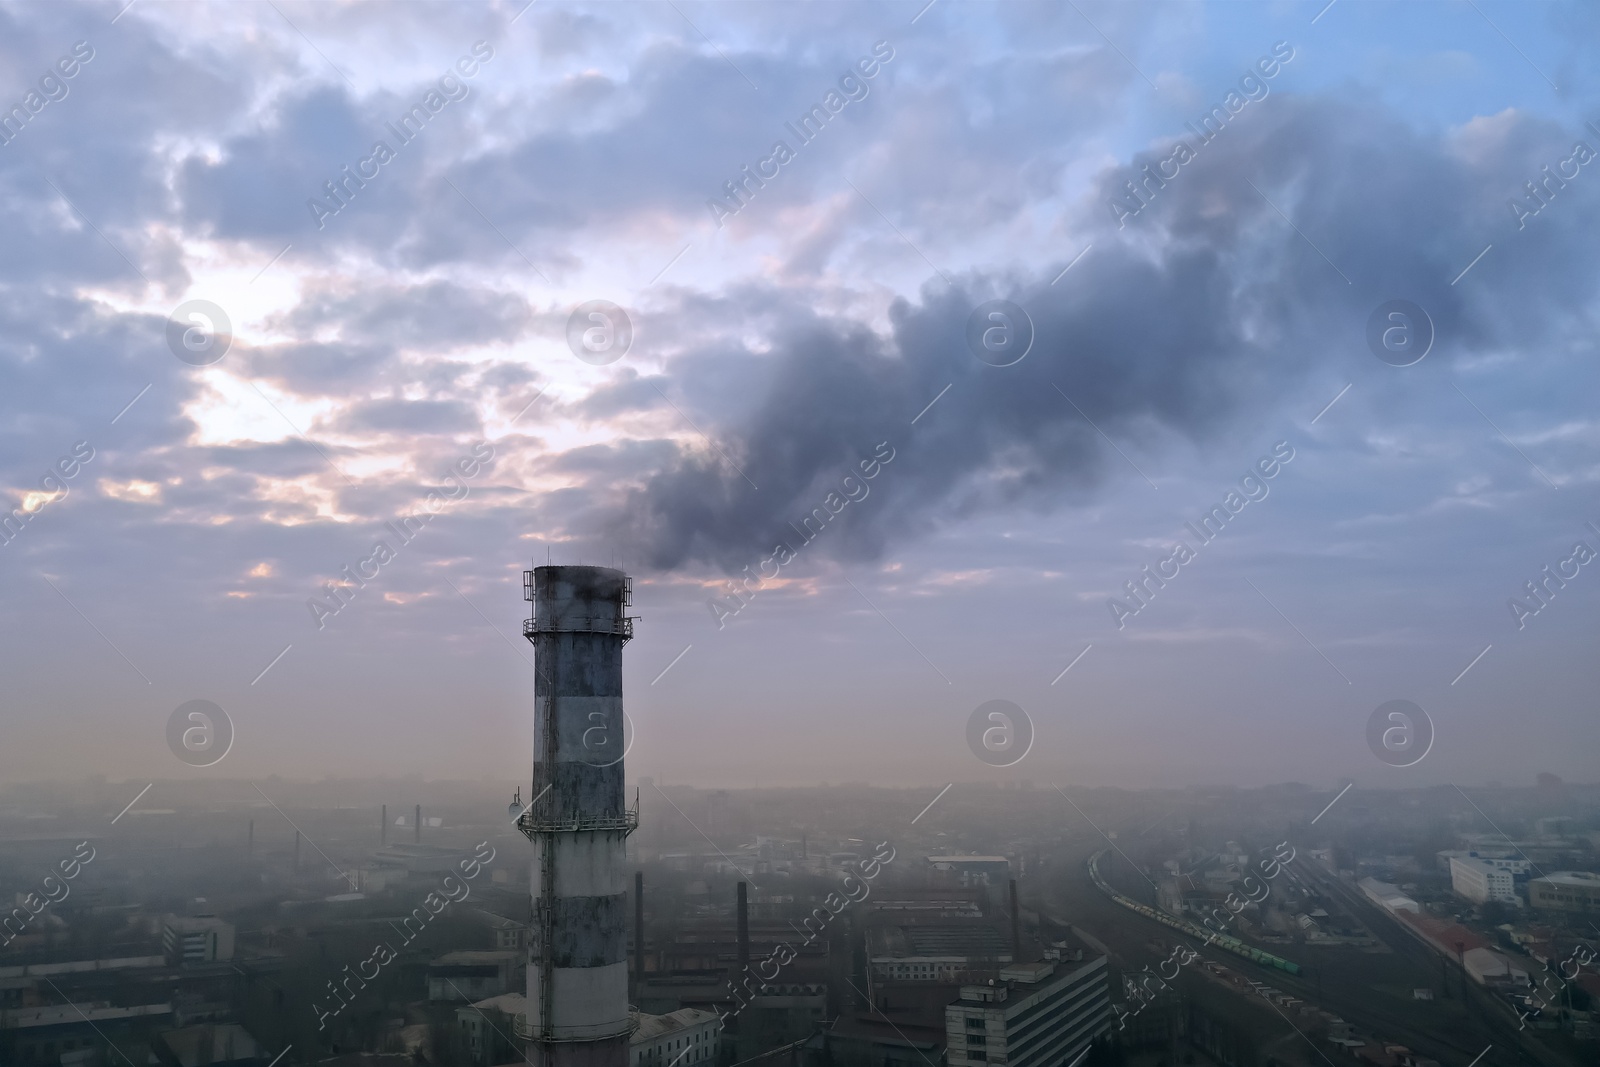 Image of CO2 emissions. Polluting air with smoke from industrial chimney outdoors, aerial view